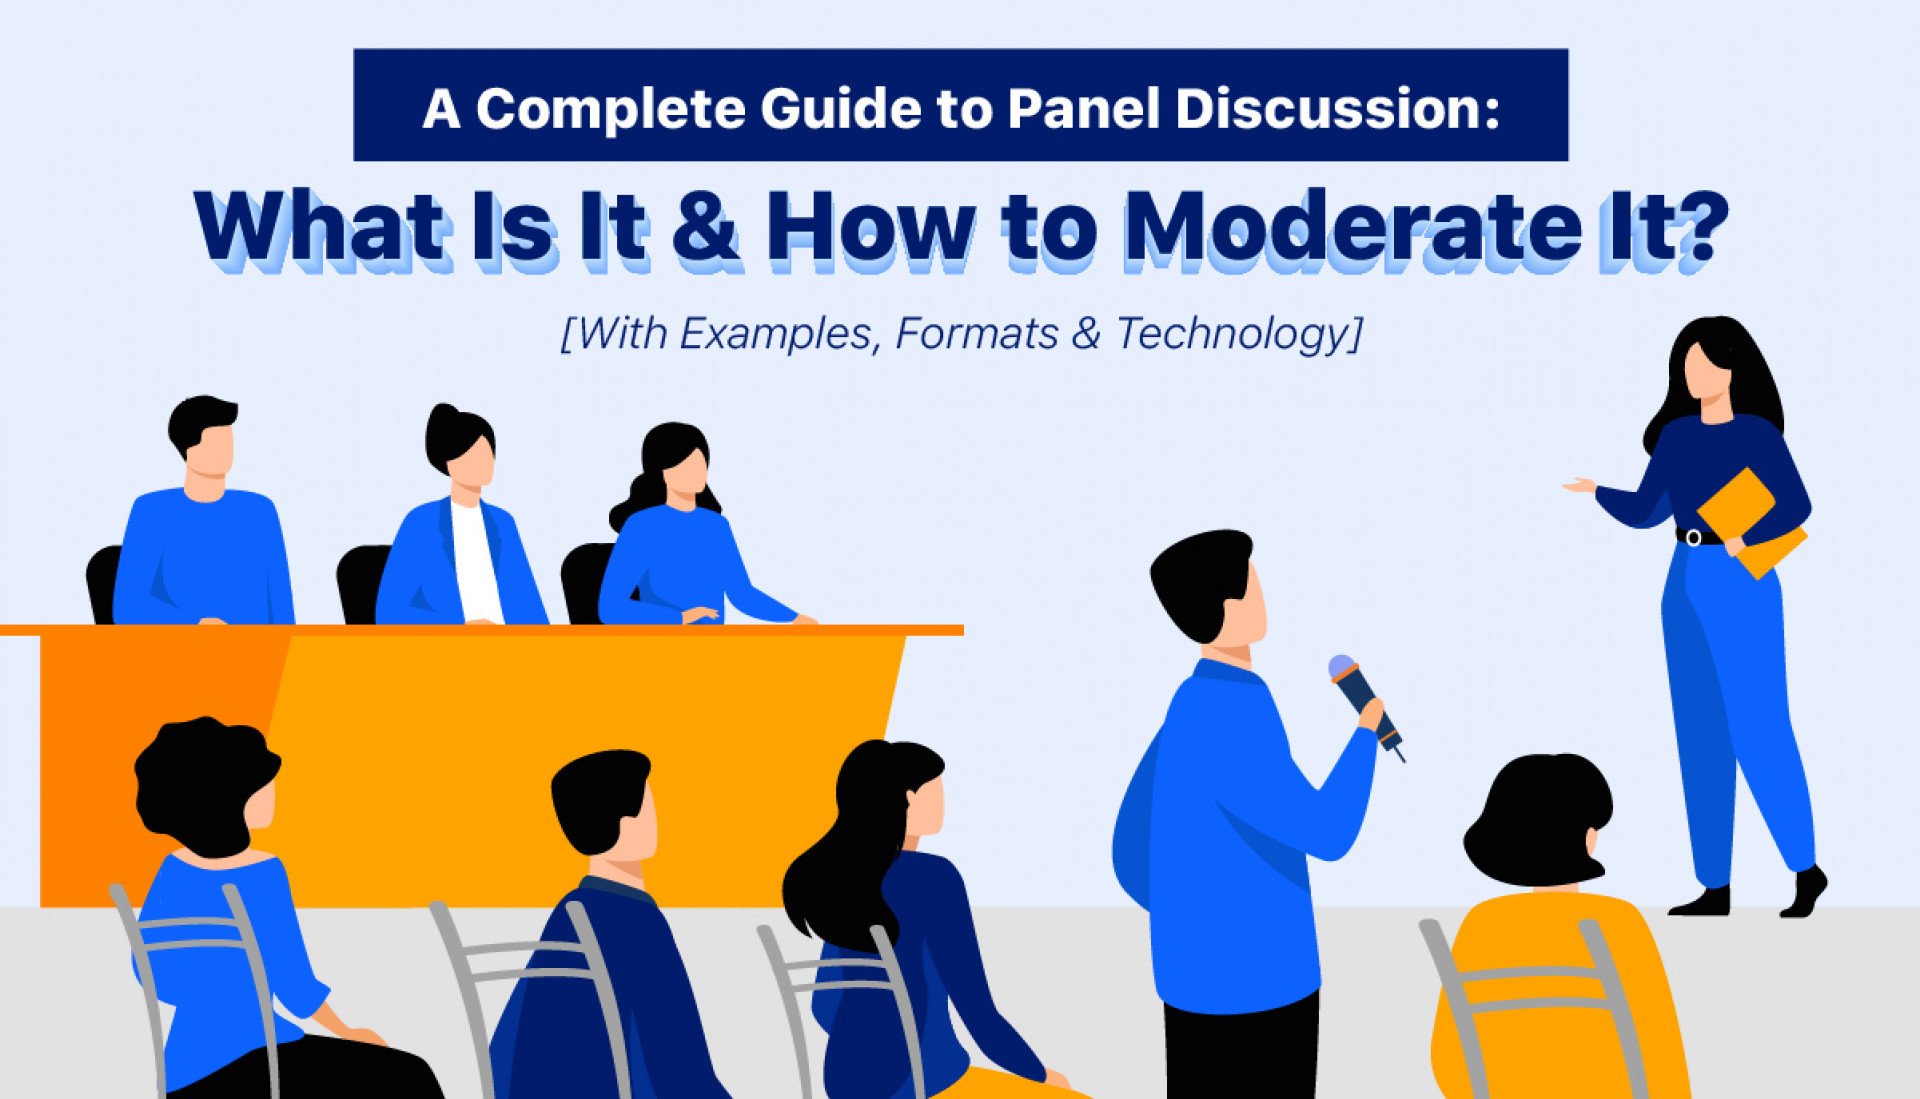 A Complete Guide to Panel Discussion: What Is It & How to Moderate It? [With Examples, Formats & Technology]